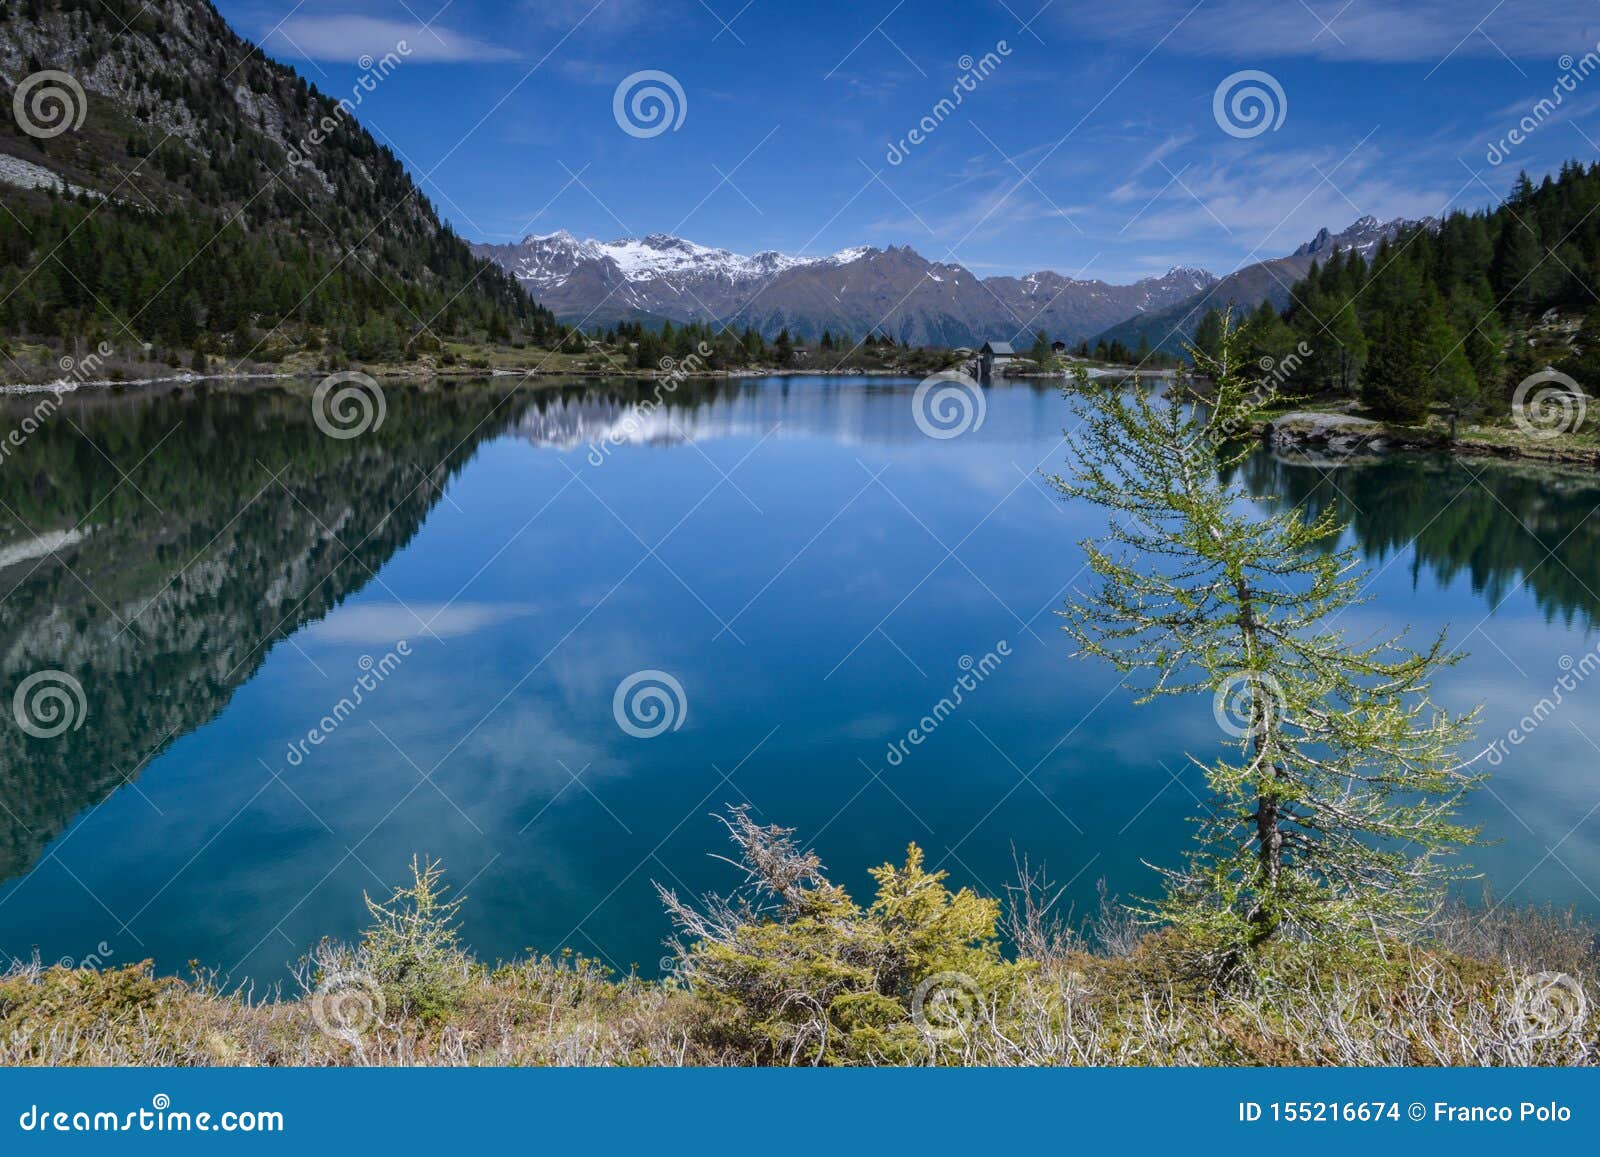 beautiful lago d`aviolo with reflection and a tree